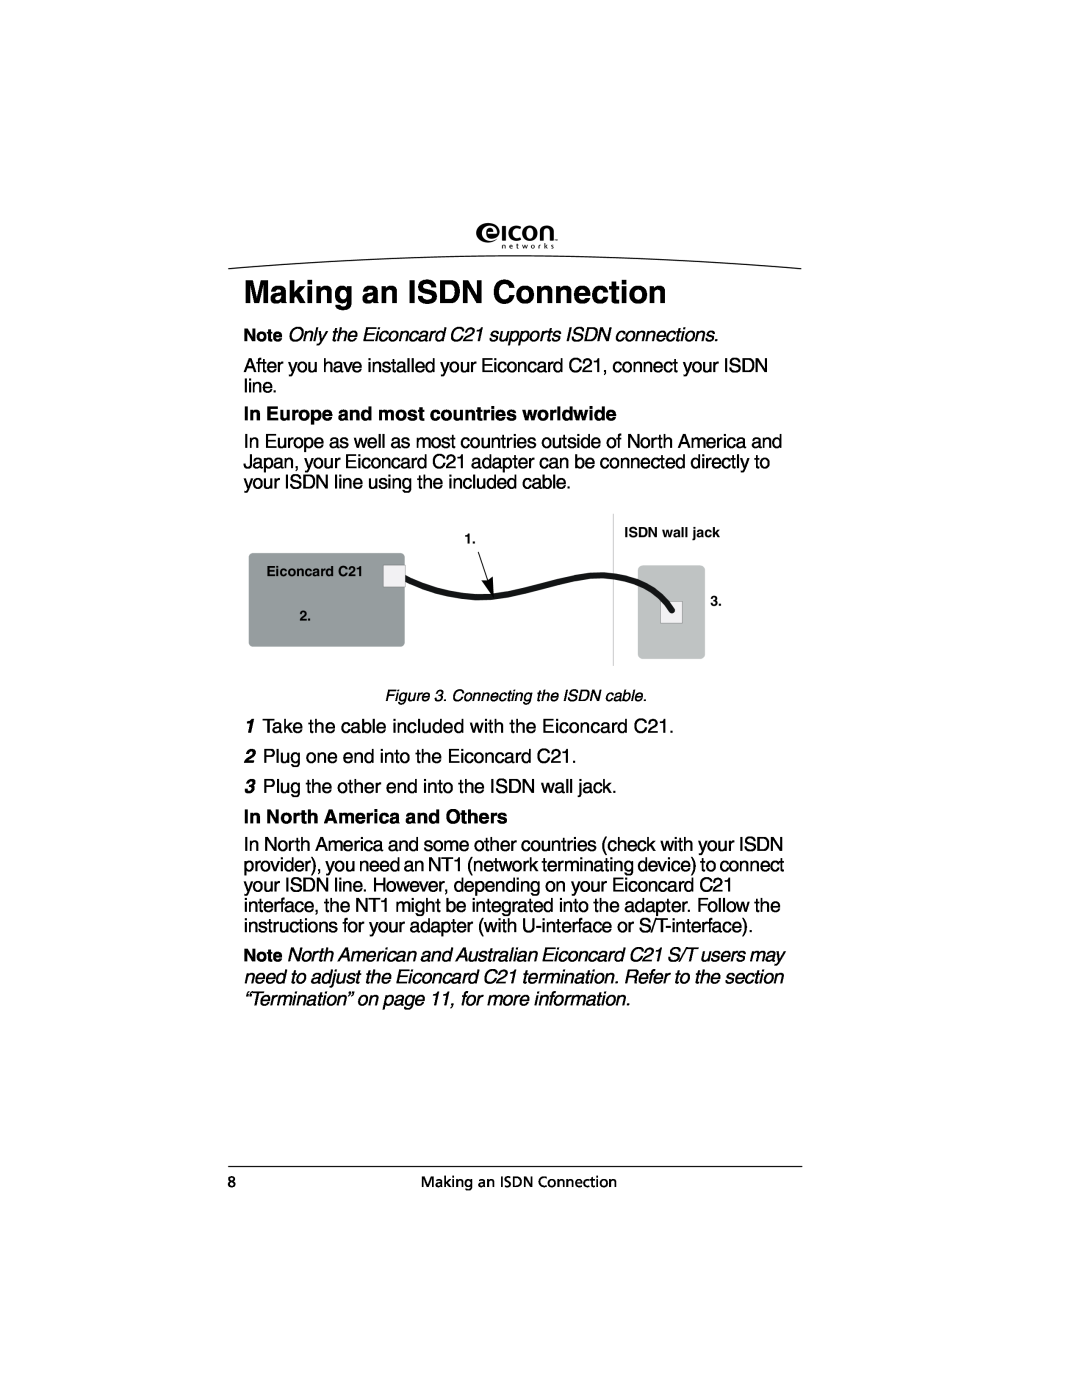 Eicon Networks C2x Family manual Making an ISDN Connection, Note Only the Eiconcard C21 supports ISDN connections 